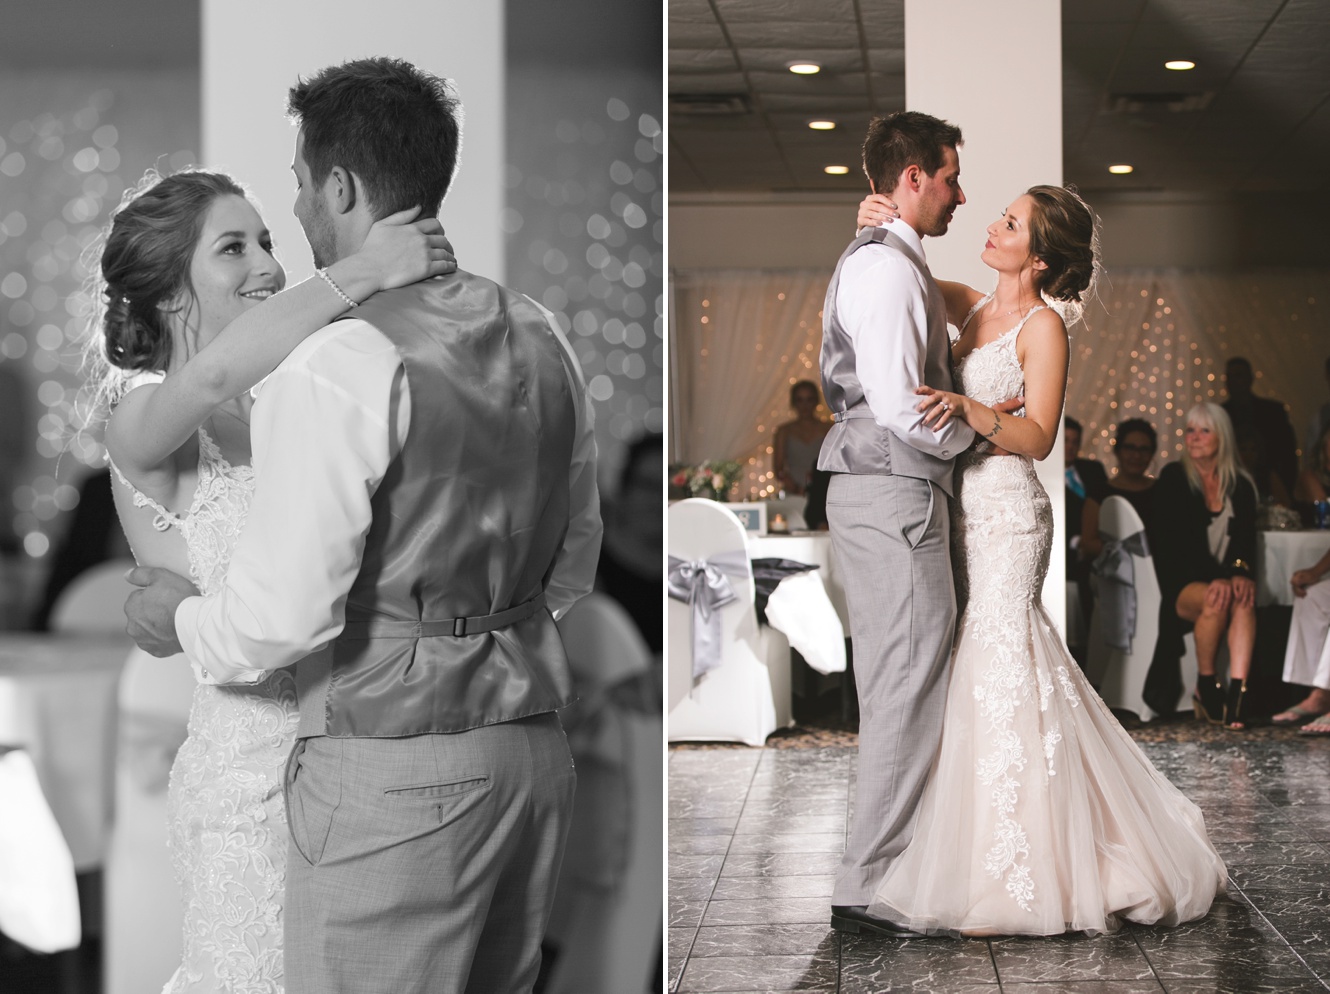 How to photograph a wedding dance